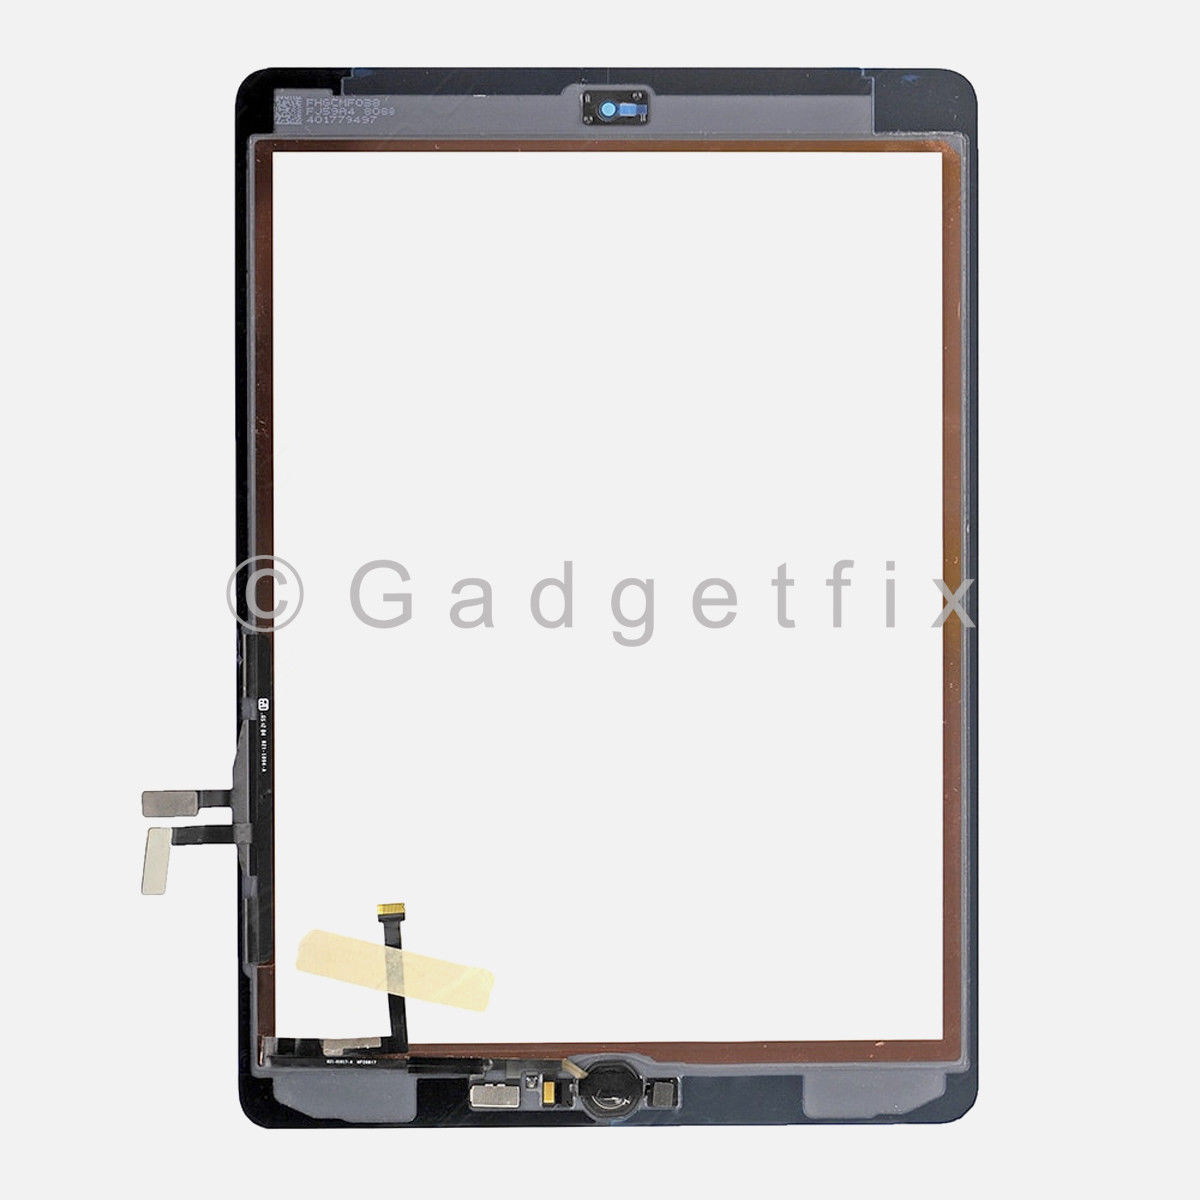 Premium White Touch Screen Digitizer + Gold Home Button for iPad 5 | 5th Gen 9.7" (2017) 